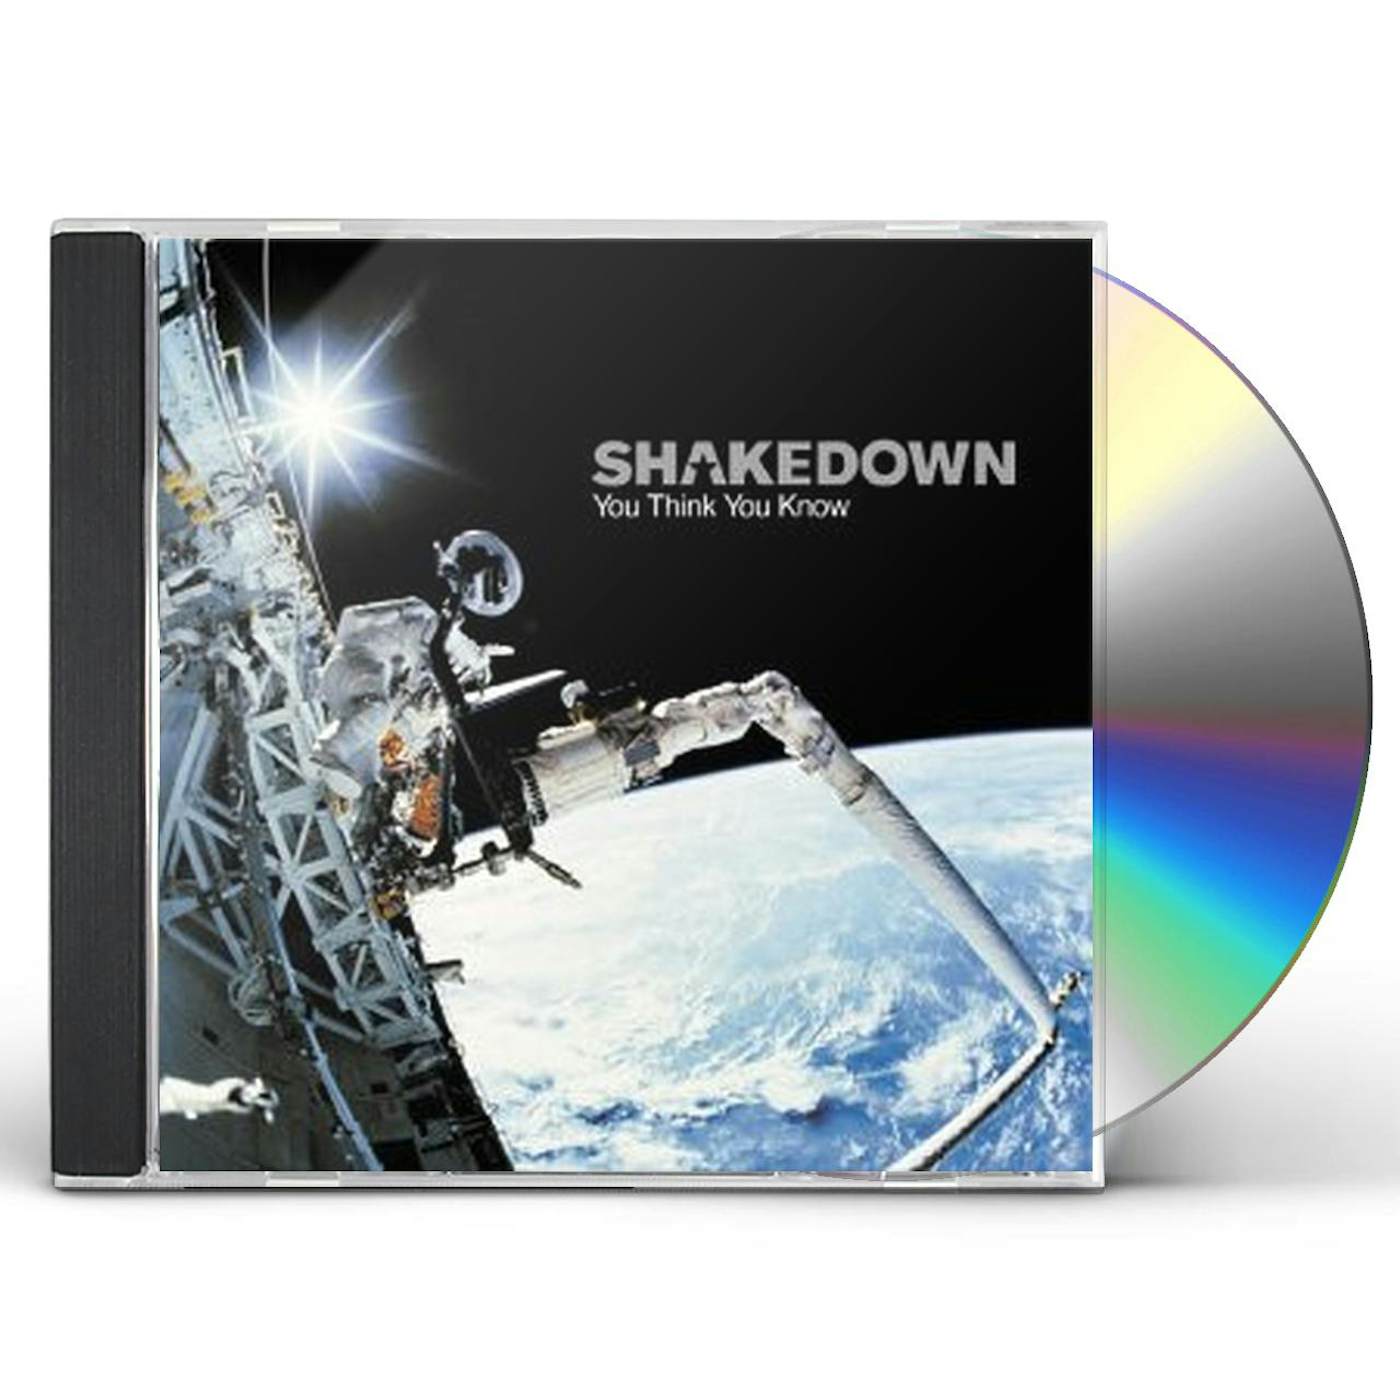 Shakedown You Think You Know CD